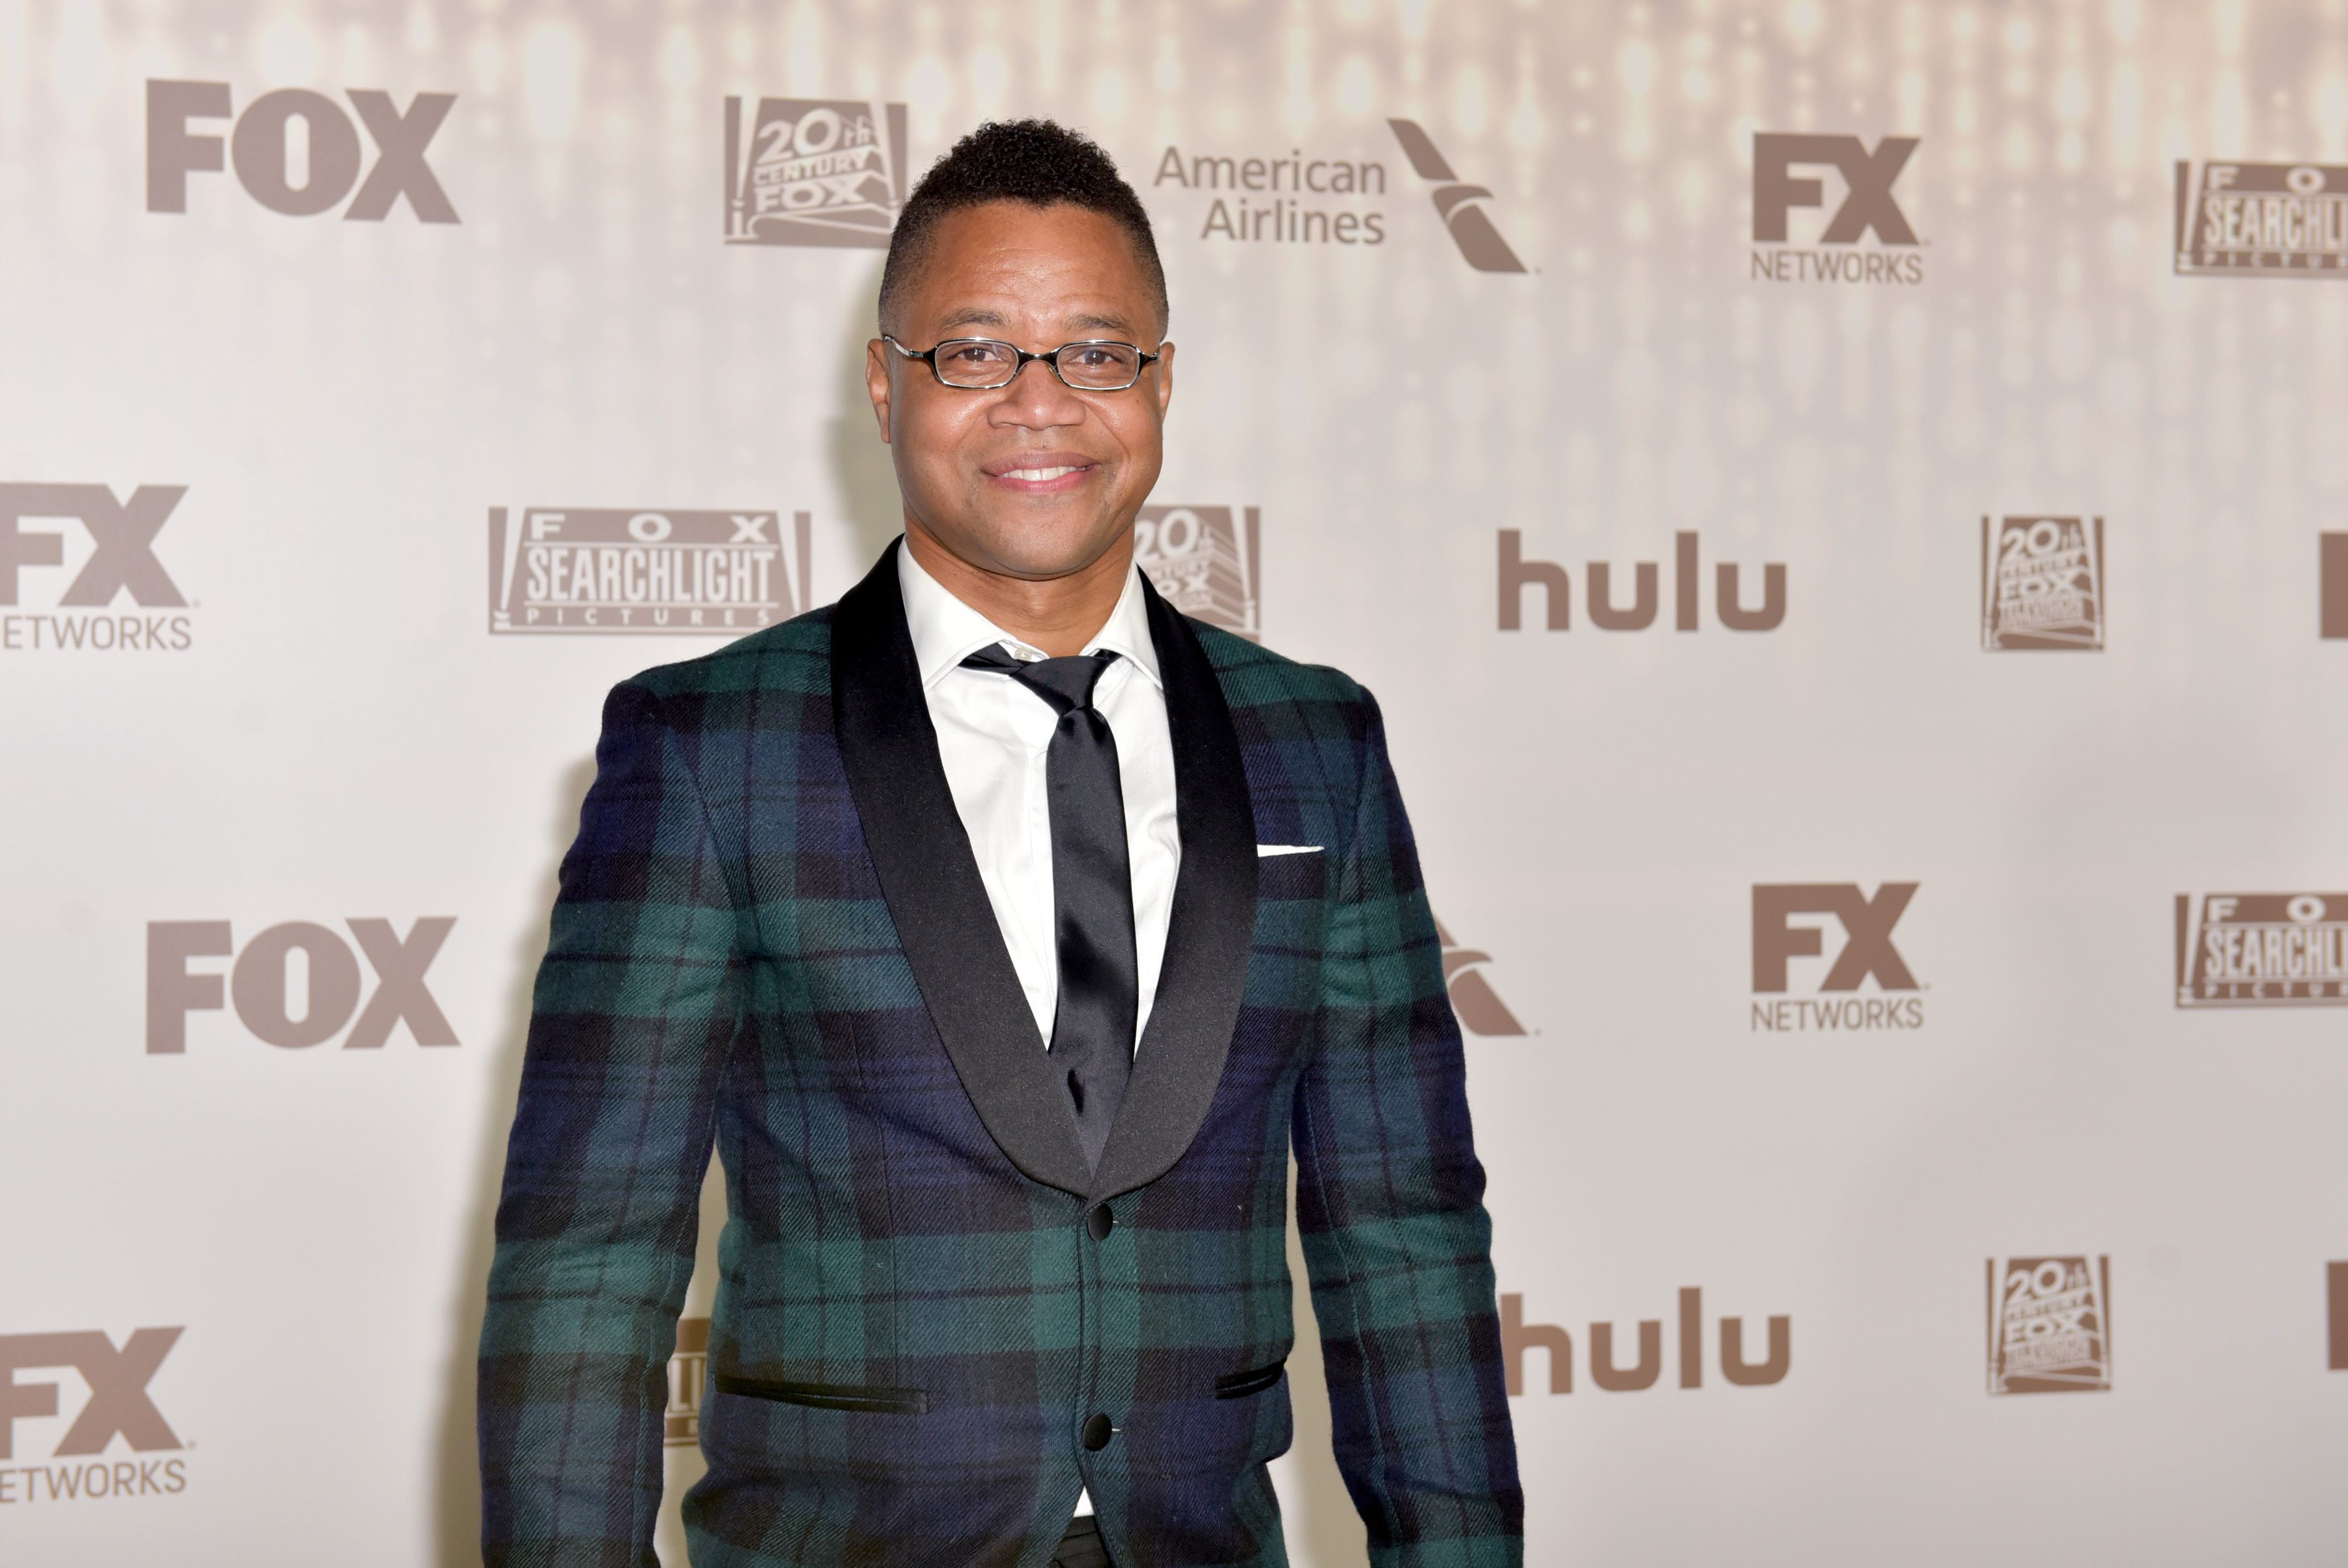 Cuba Gooding Jr. at The Beverly Hilton Hotel on January 8, 2017, in Beverly Hills, California. | Source: Getty Images